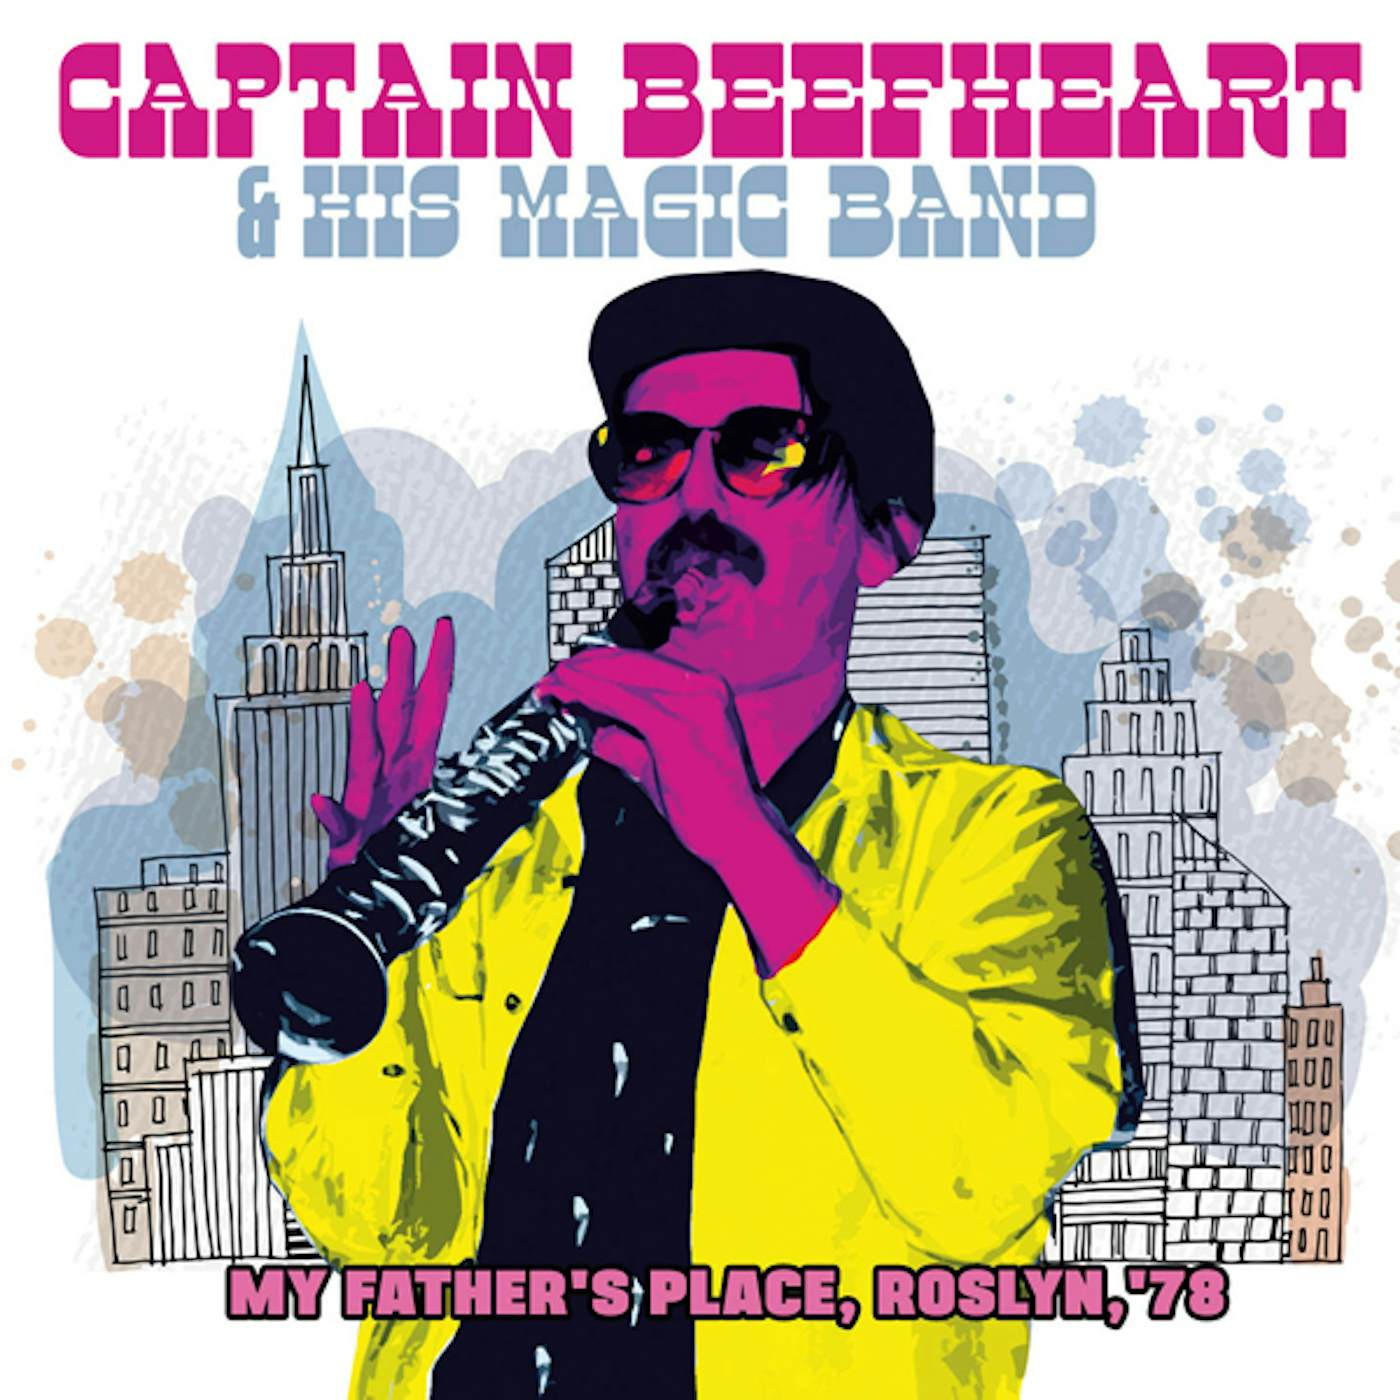 Captain Beefheart & His Magic Band MY FATHER'S PLACE / ROSLYN / 78 CD